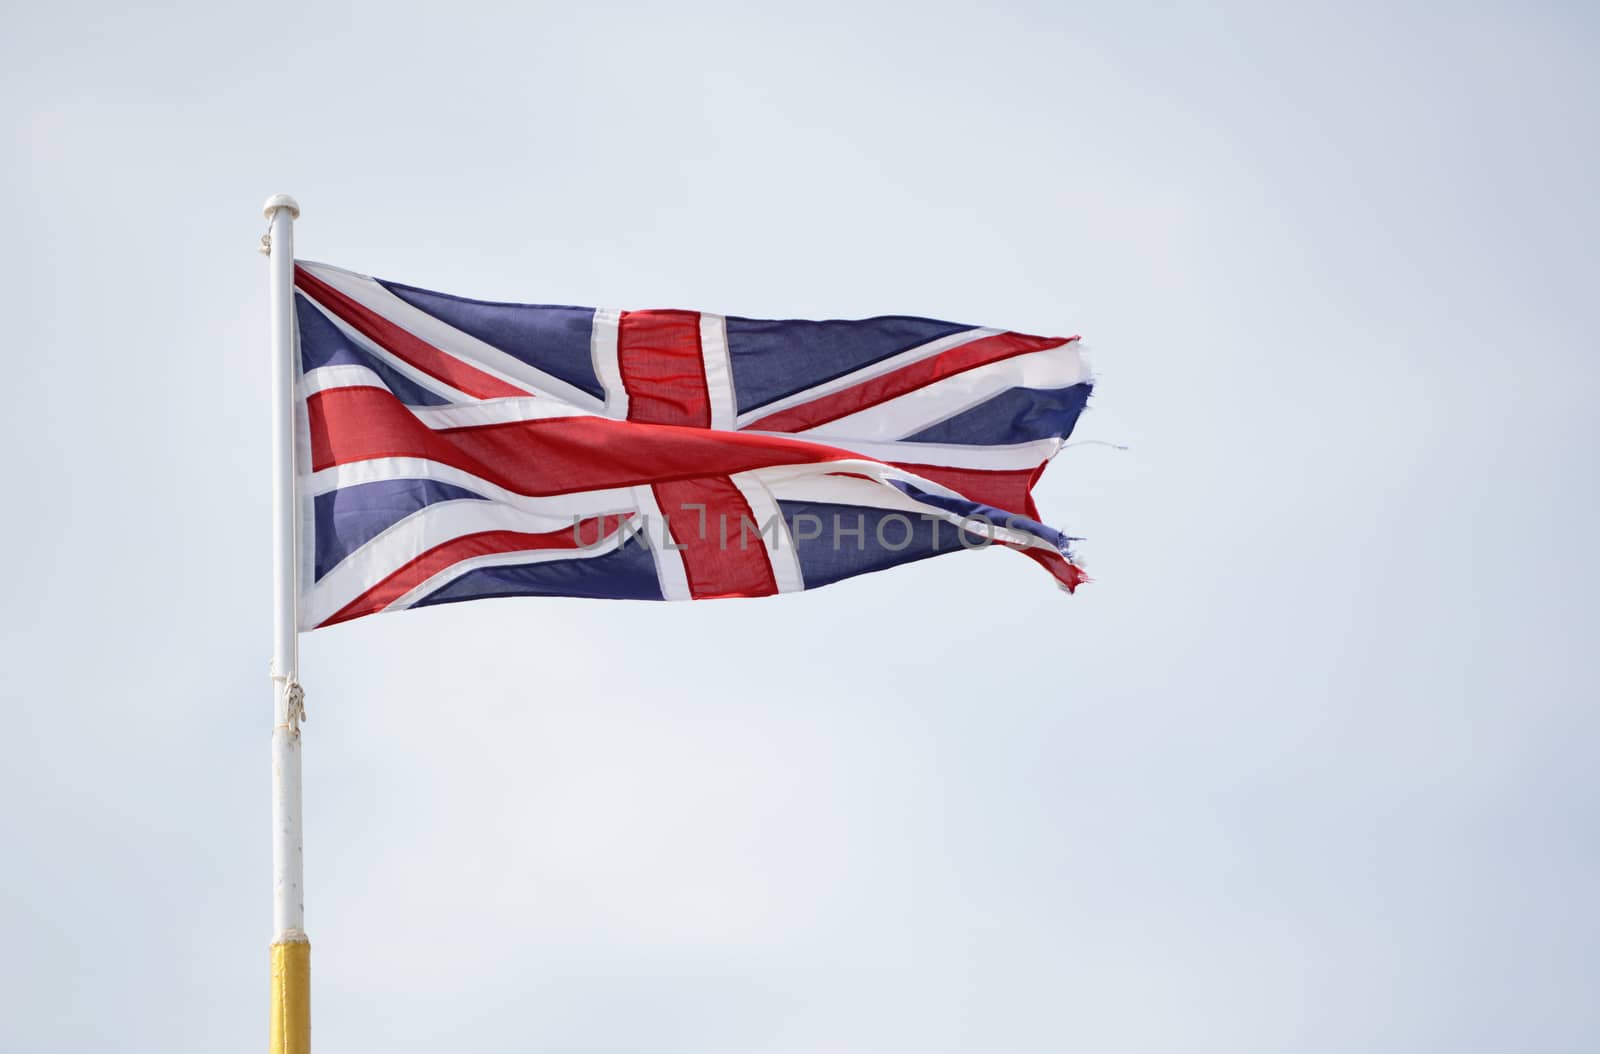 Union Jack flag representing Scotland, Wales, Northern Ireland and England, flies against a light blue sky